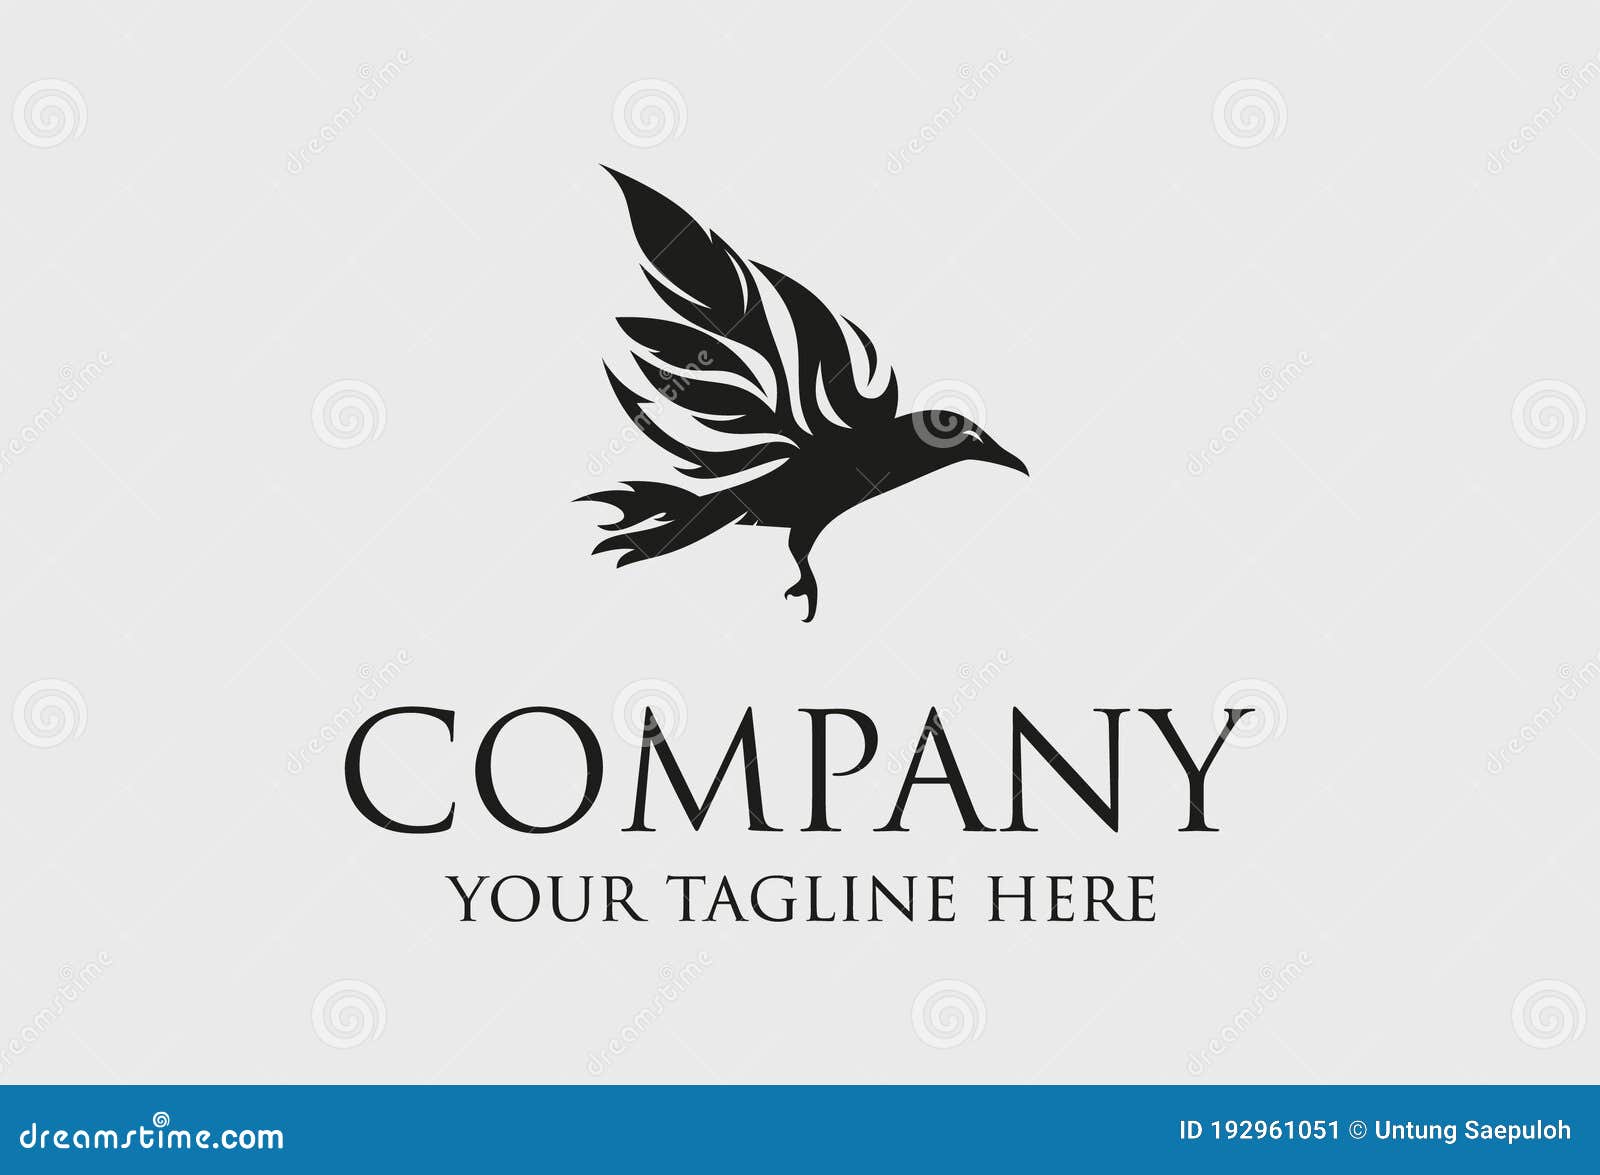 Greetings creative minds! Here is my logo design for my company Brand Crow.  Could you please review it & I'm open for any suggestions you may have.  Thank You! : r/WillPatersonDesign